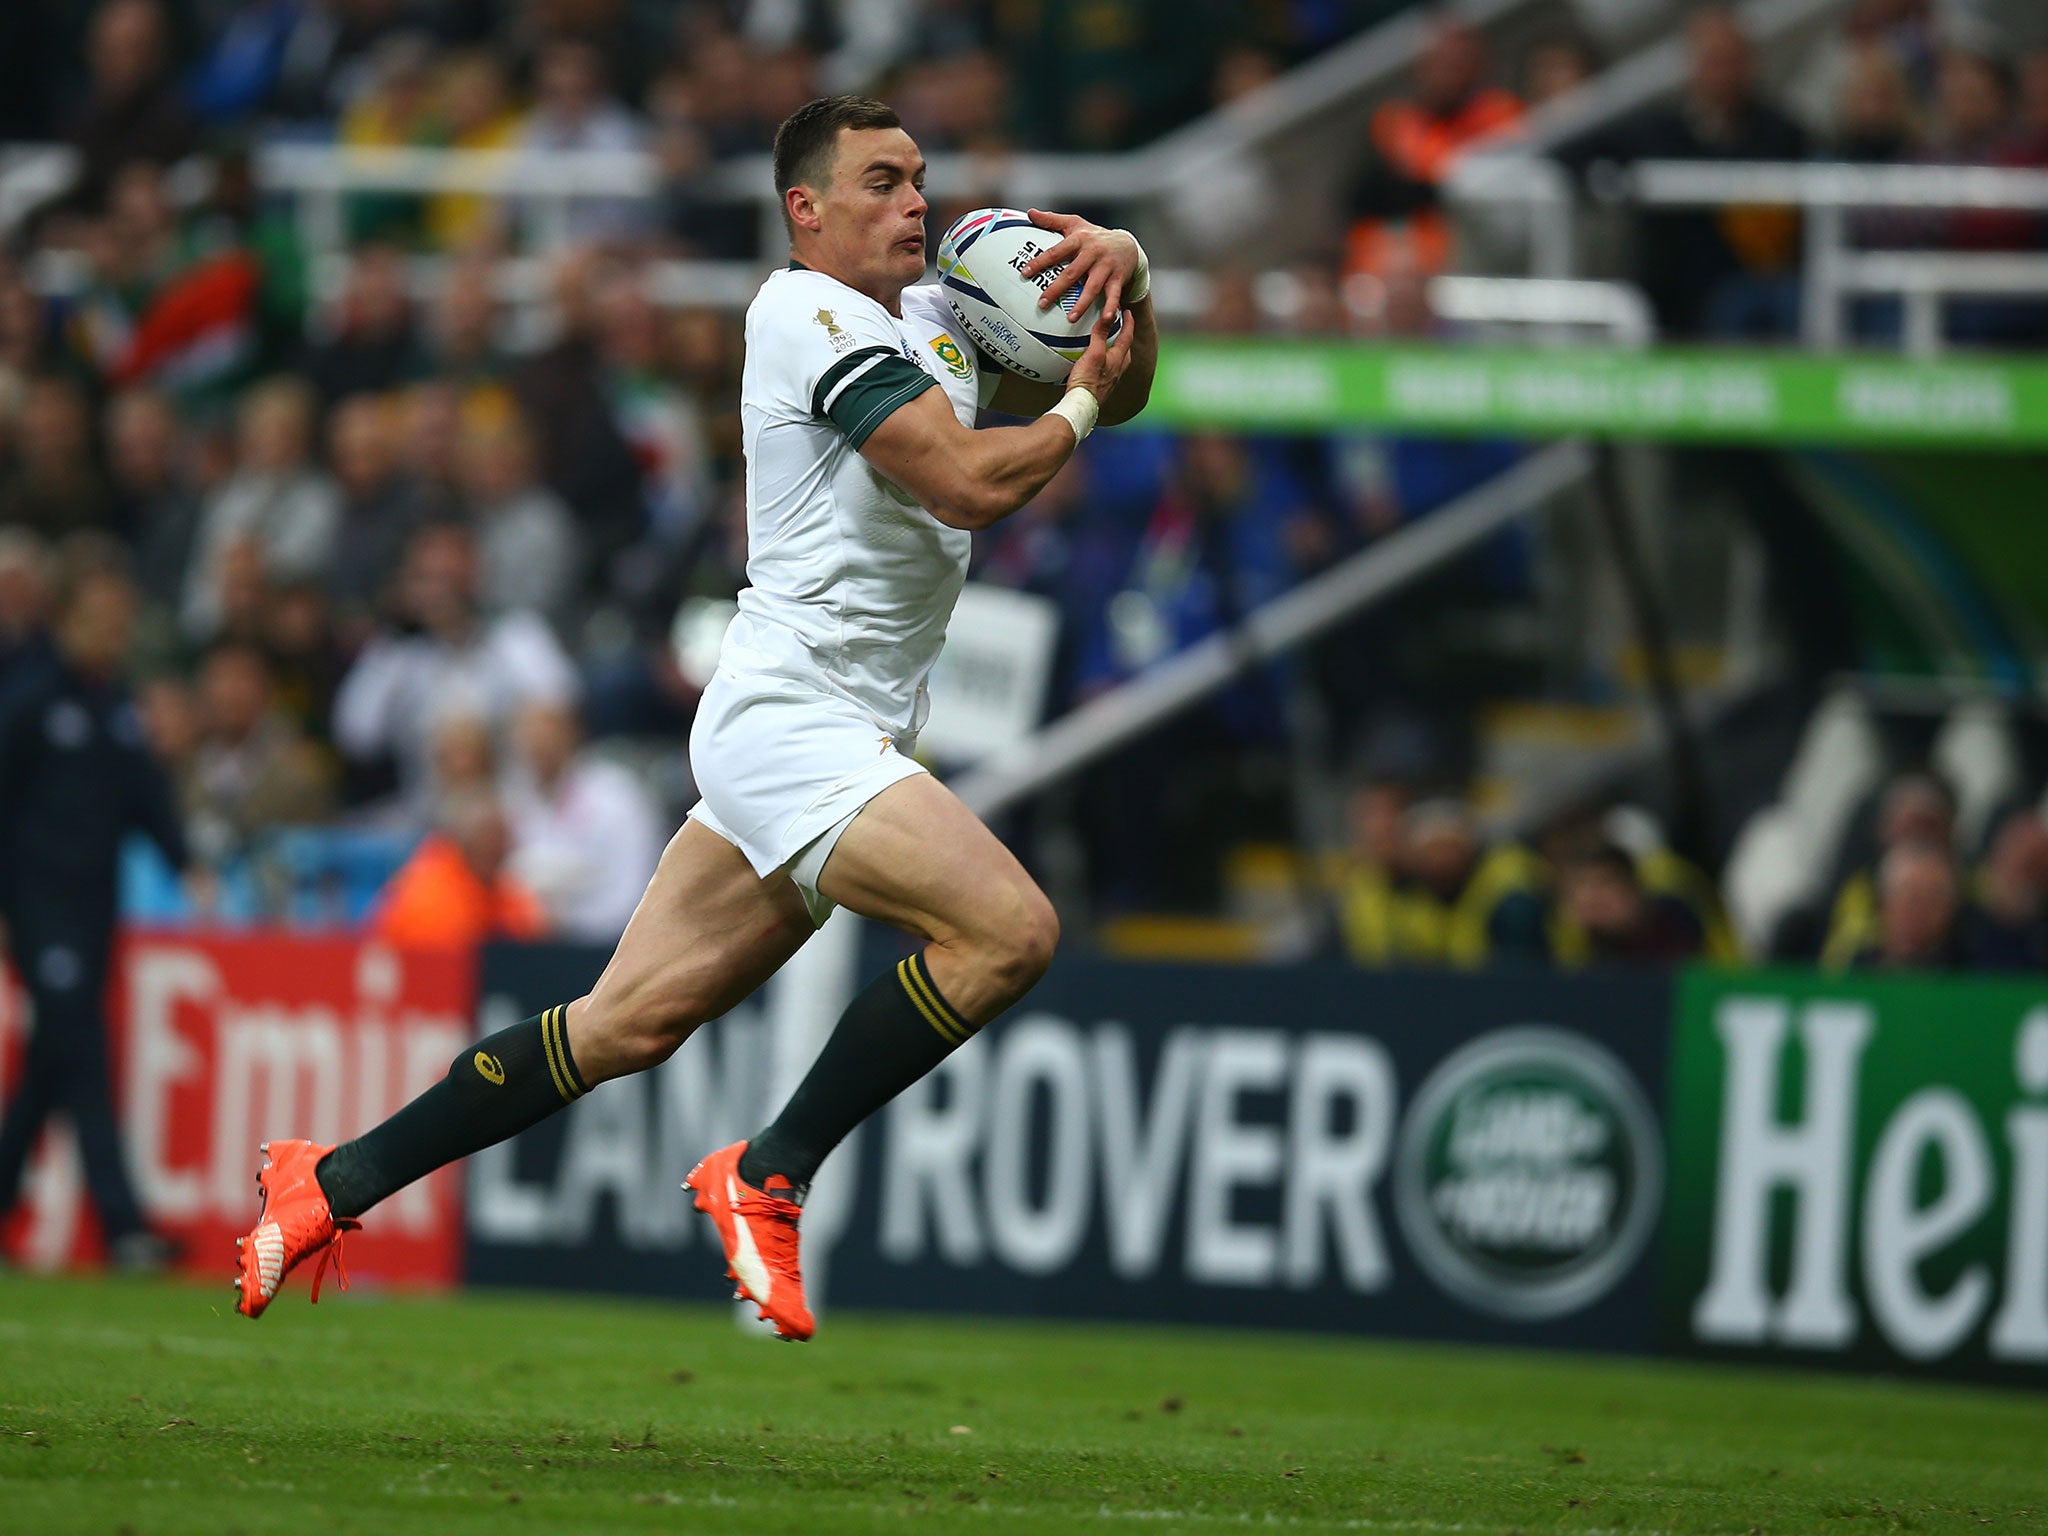 Jesse Kriel in action for South Africa against Scotland